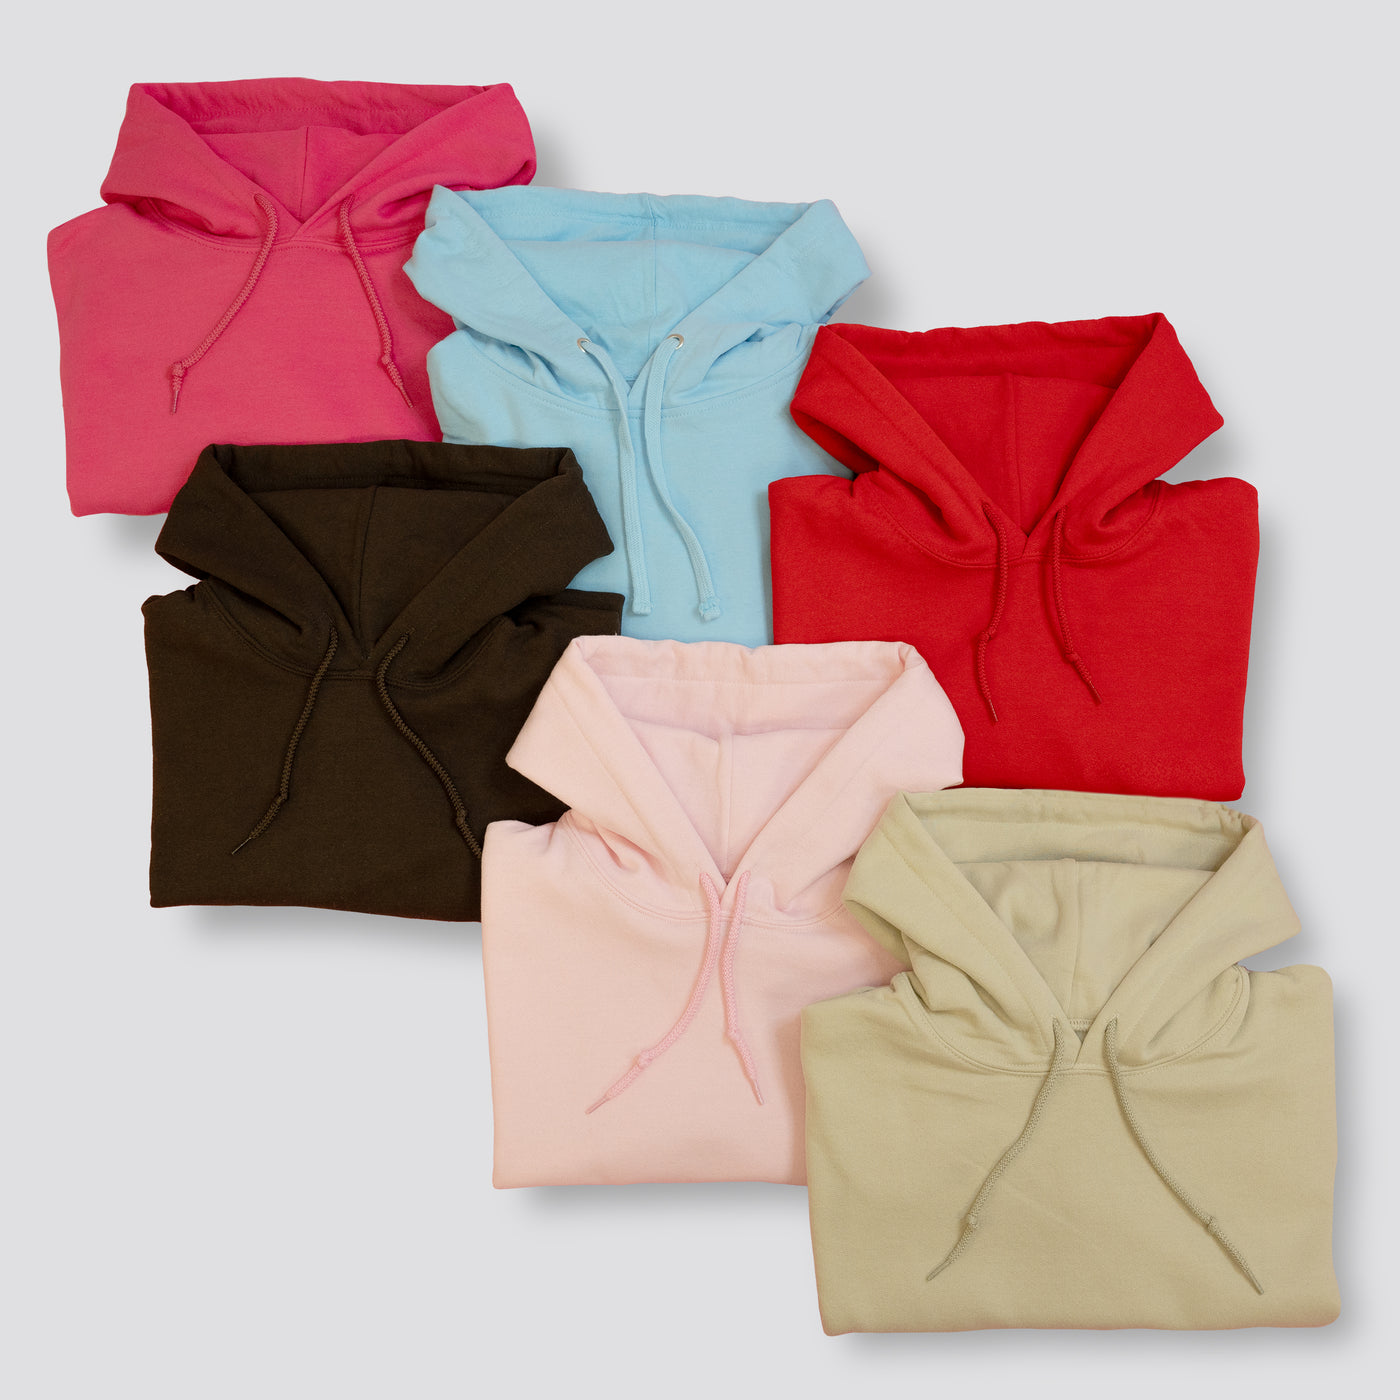 Hoodie options in pink, baby blue, red, brown, hot pink, and beige